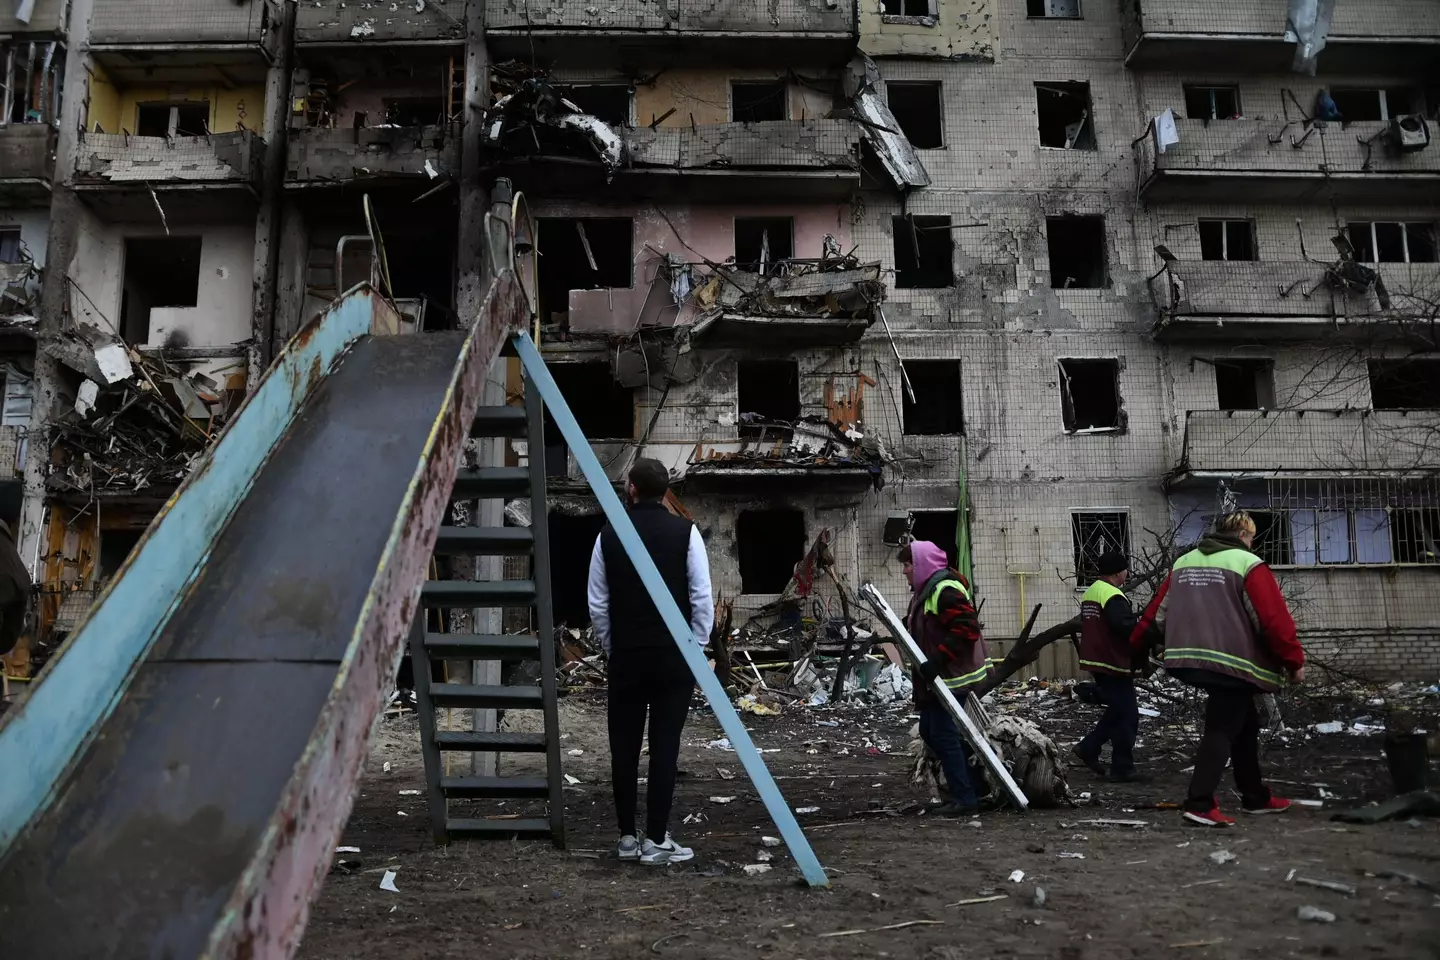 People's homes have been destroyed and many killed during Russia's invasion of Ukraine.